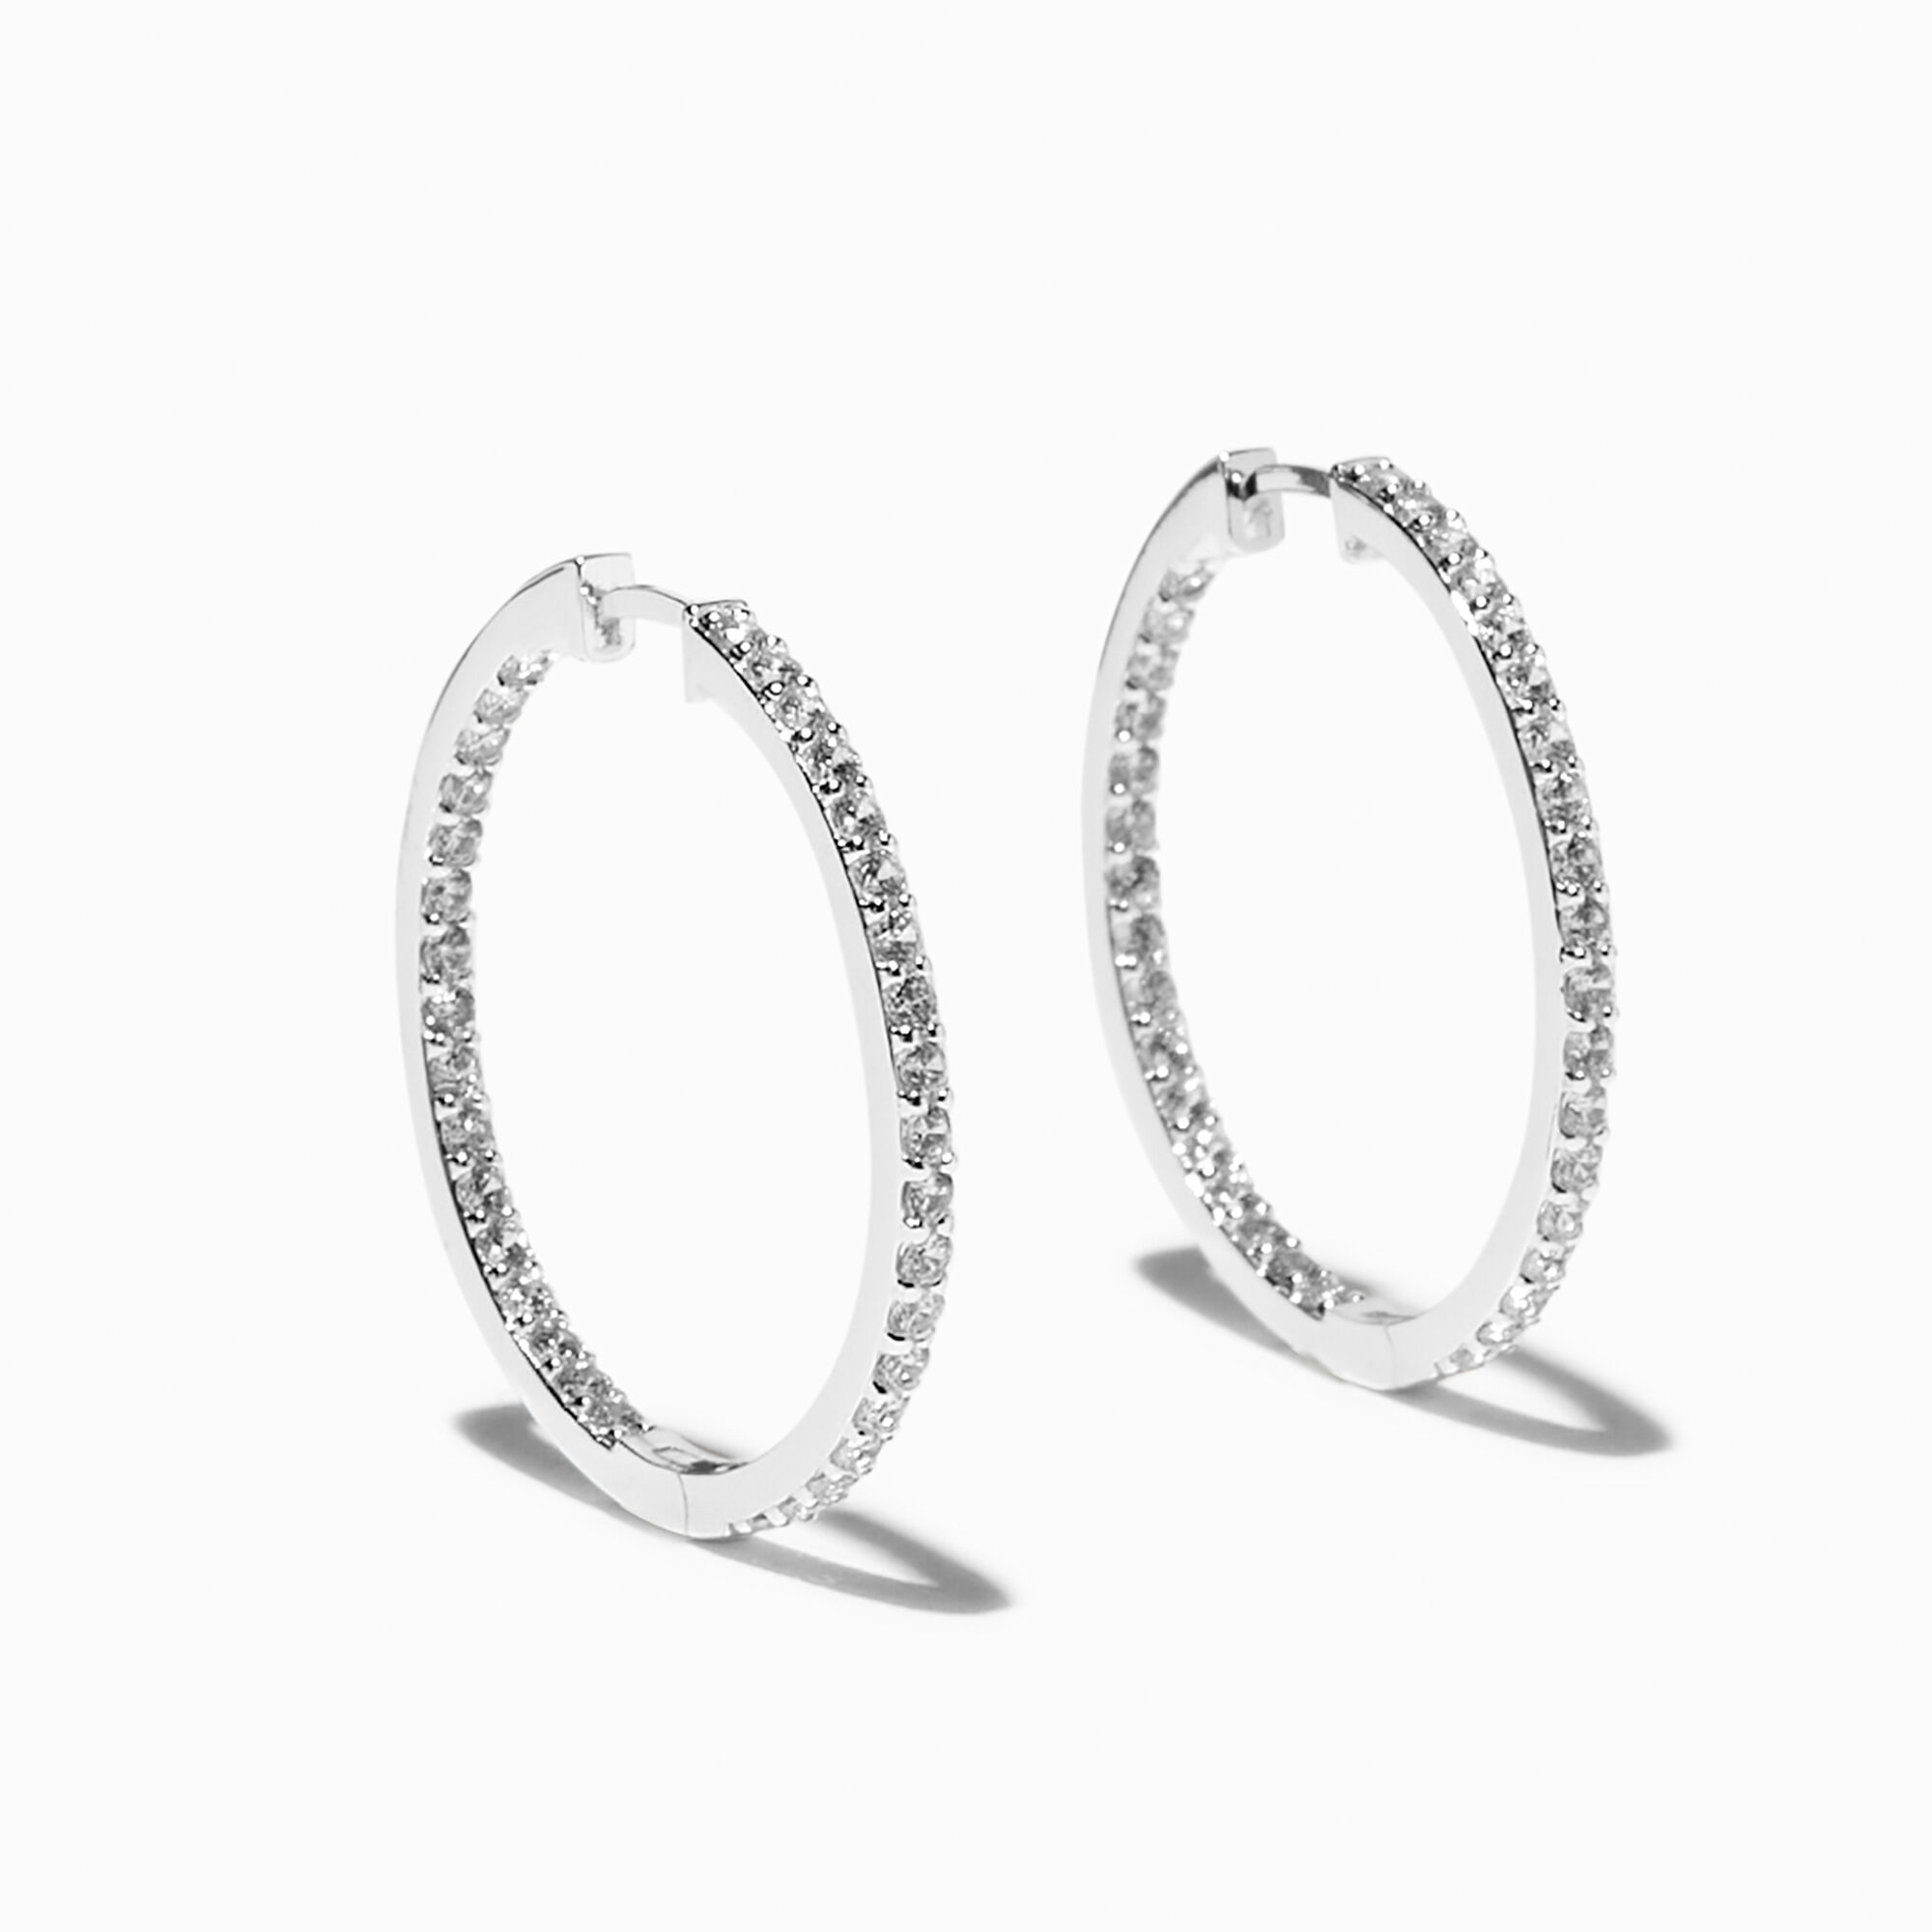 View C Luxe By Claires Plated 30MM Cubic Zirconia Hoop Earrings Silver information